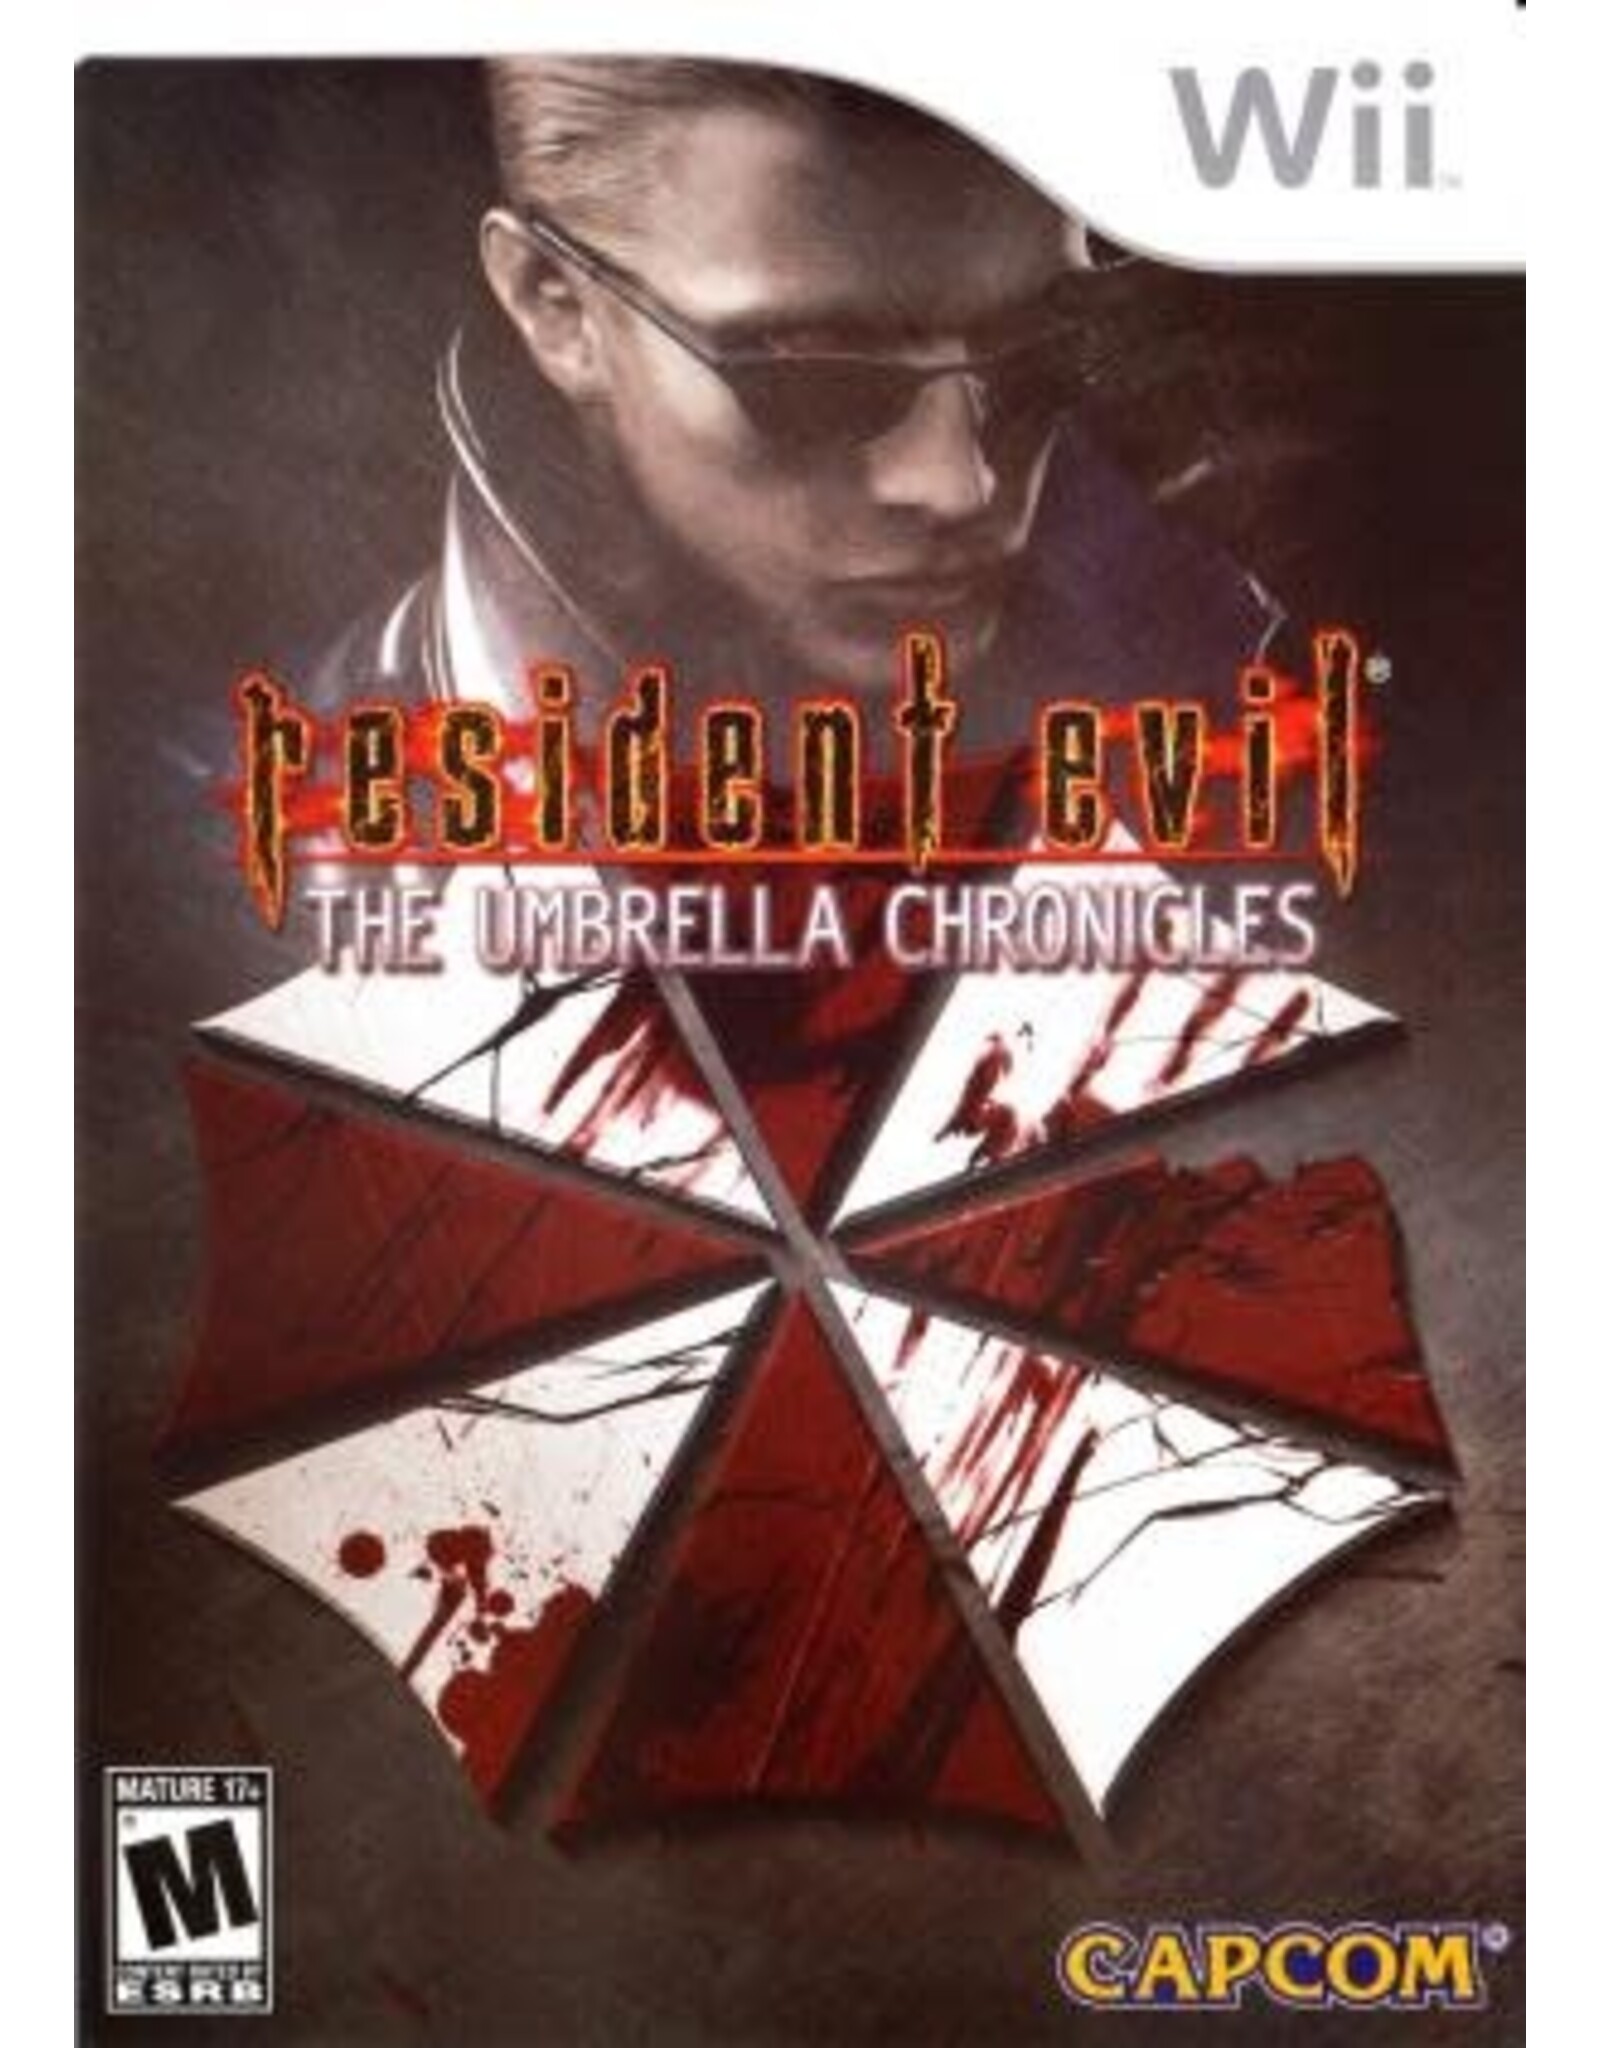 Wii Resident Evil The Umbrella Chronicles (Used)